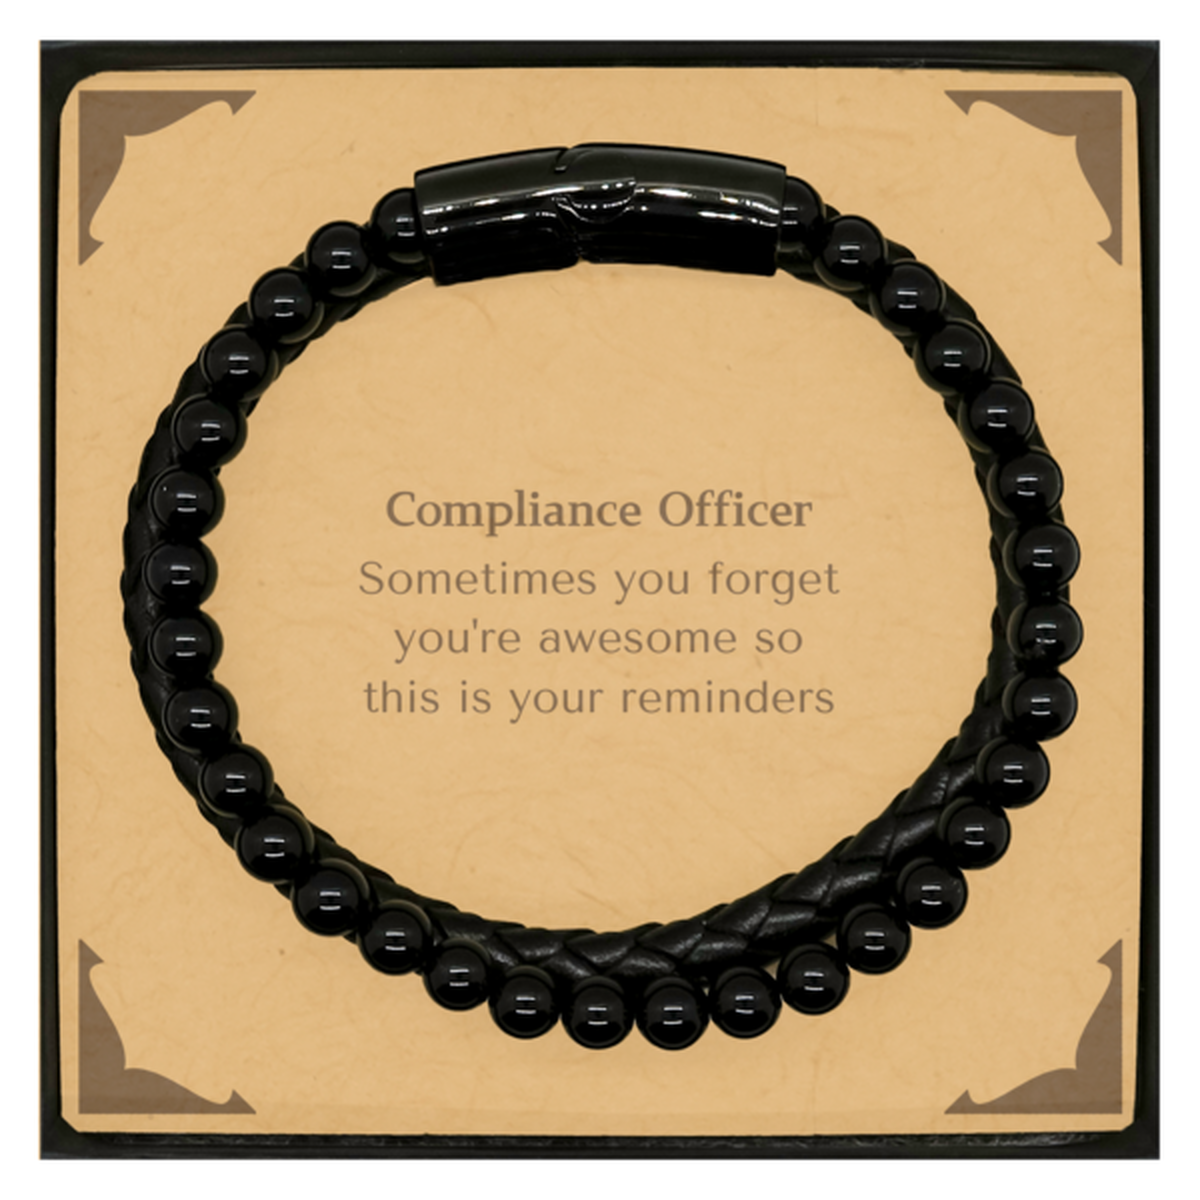 Sentimental Compliance Officer Stone Leather Bracelets, Compliance Officer Sometimes you forget you're awesome so this is your reminders, Graduation Christmas Birthday Gifts for Compliance Officer, Men, Women, Coworkers